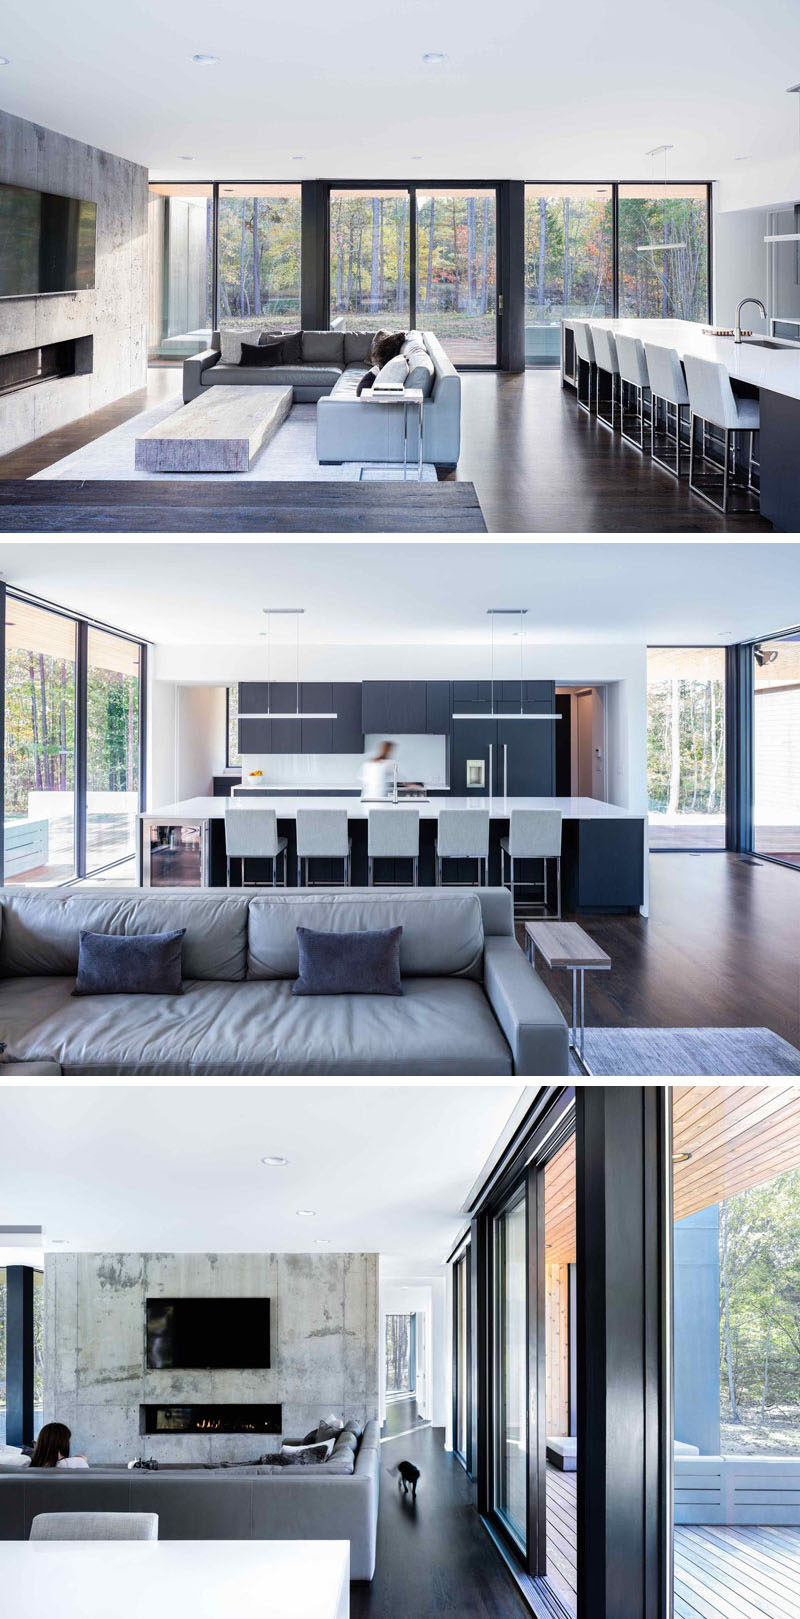 Inside this modern house, the living room and kitchen share the same space. The living room has the tv mounted on an exposed concrete wall that also features a fireplace, while the kitchen has a large island with seating, dark grey cabinets and white countertops.